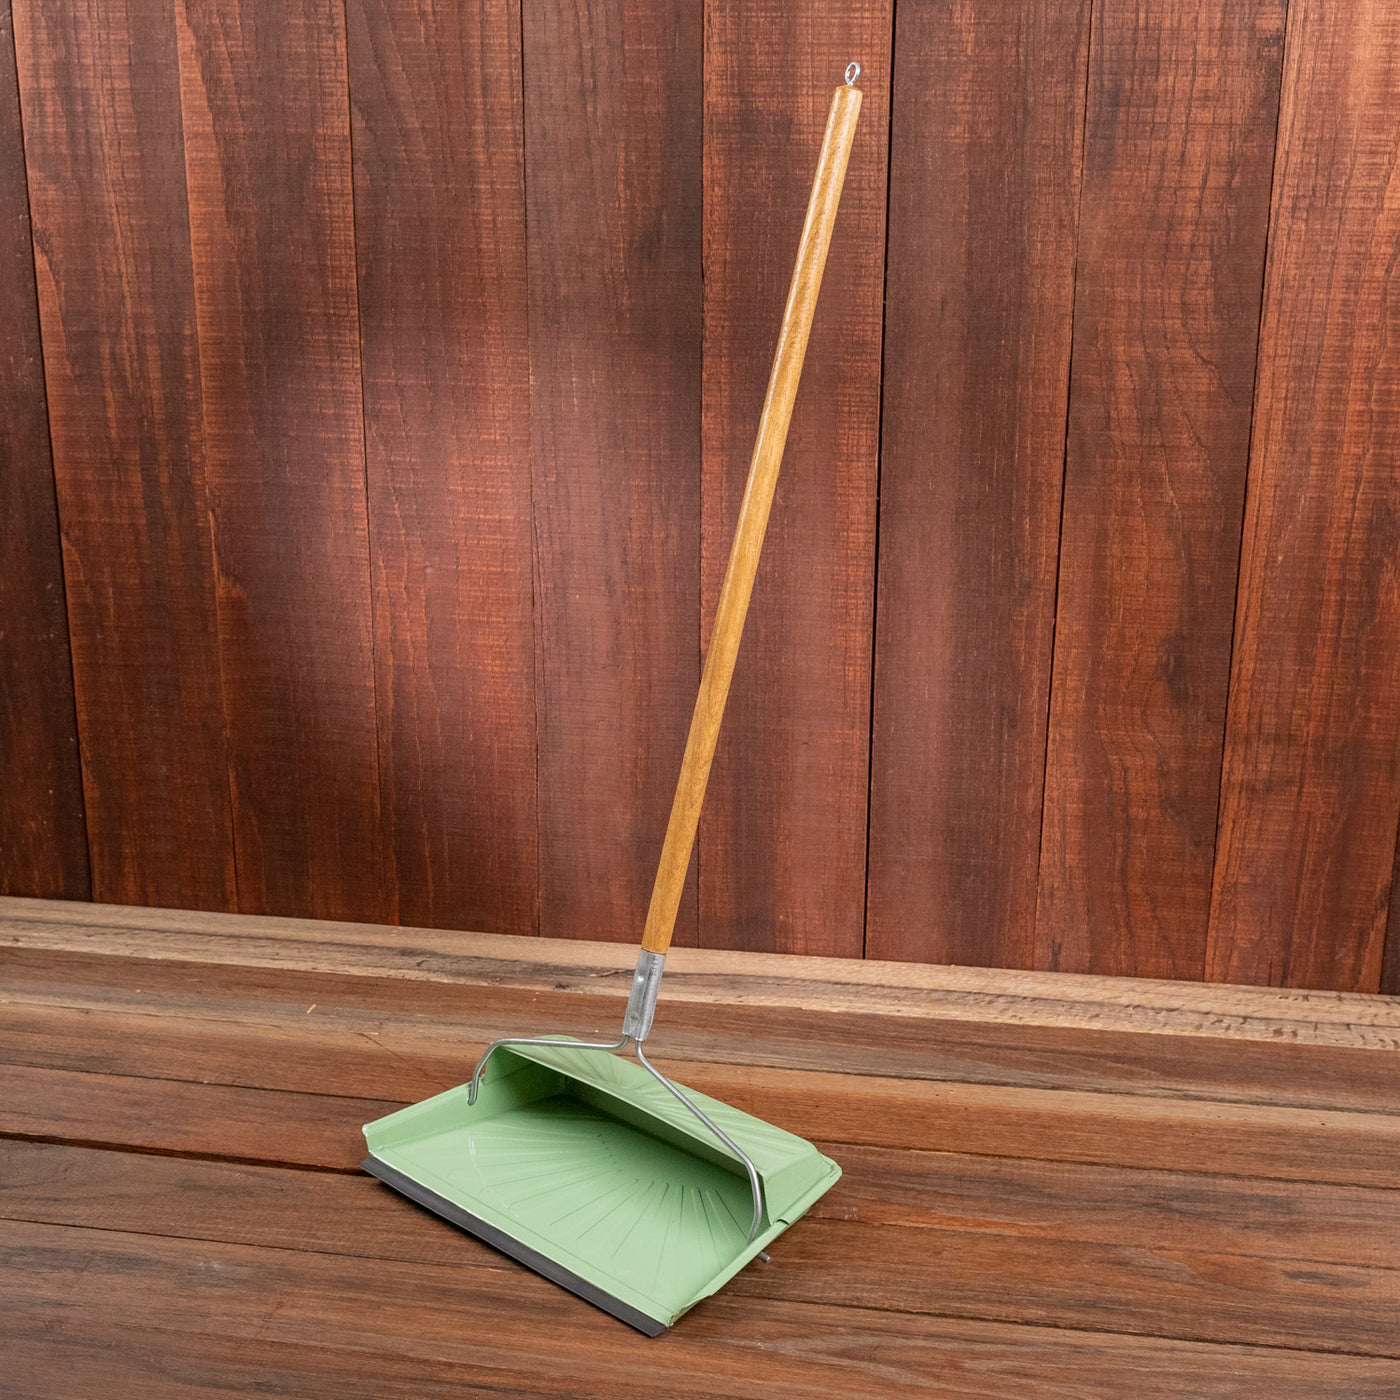 Dust Pan with Wooden Handle